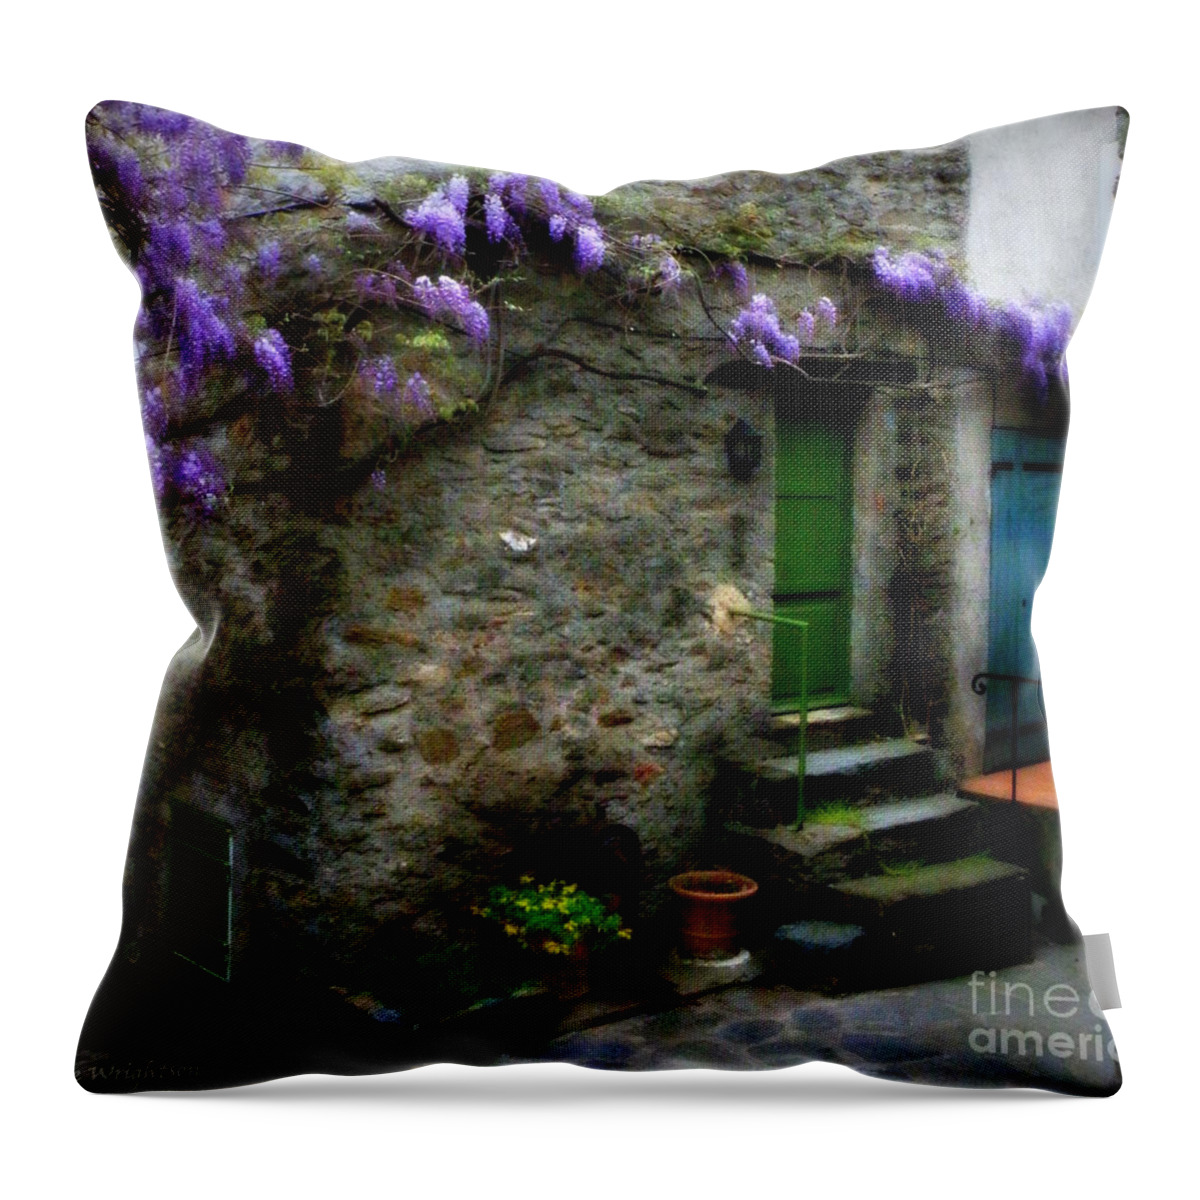 Wisteria Throw Pillow featuring the photograph Wisteria on Stone House by Lainie Wrightson